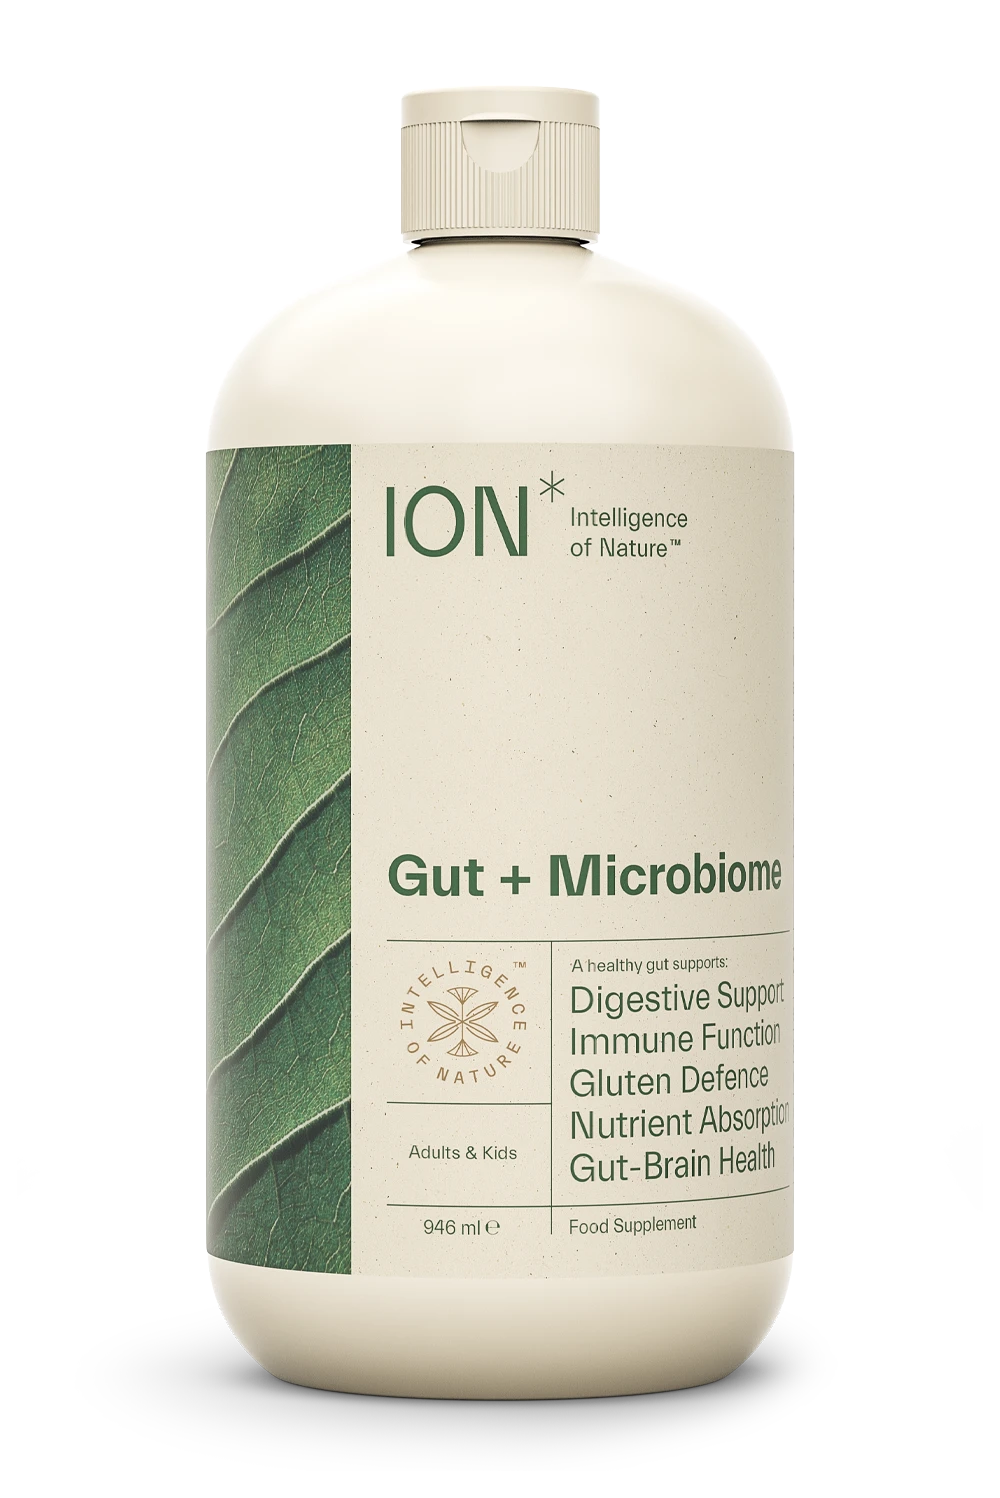 ION Gut + Microbiome Supplement Product